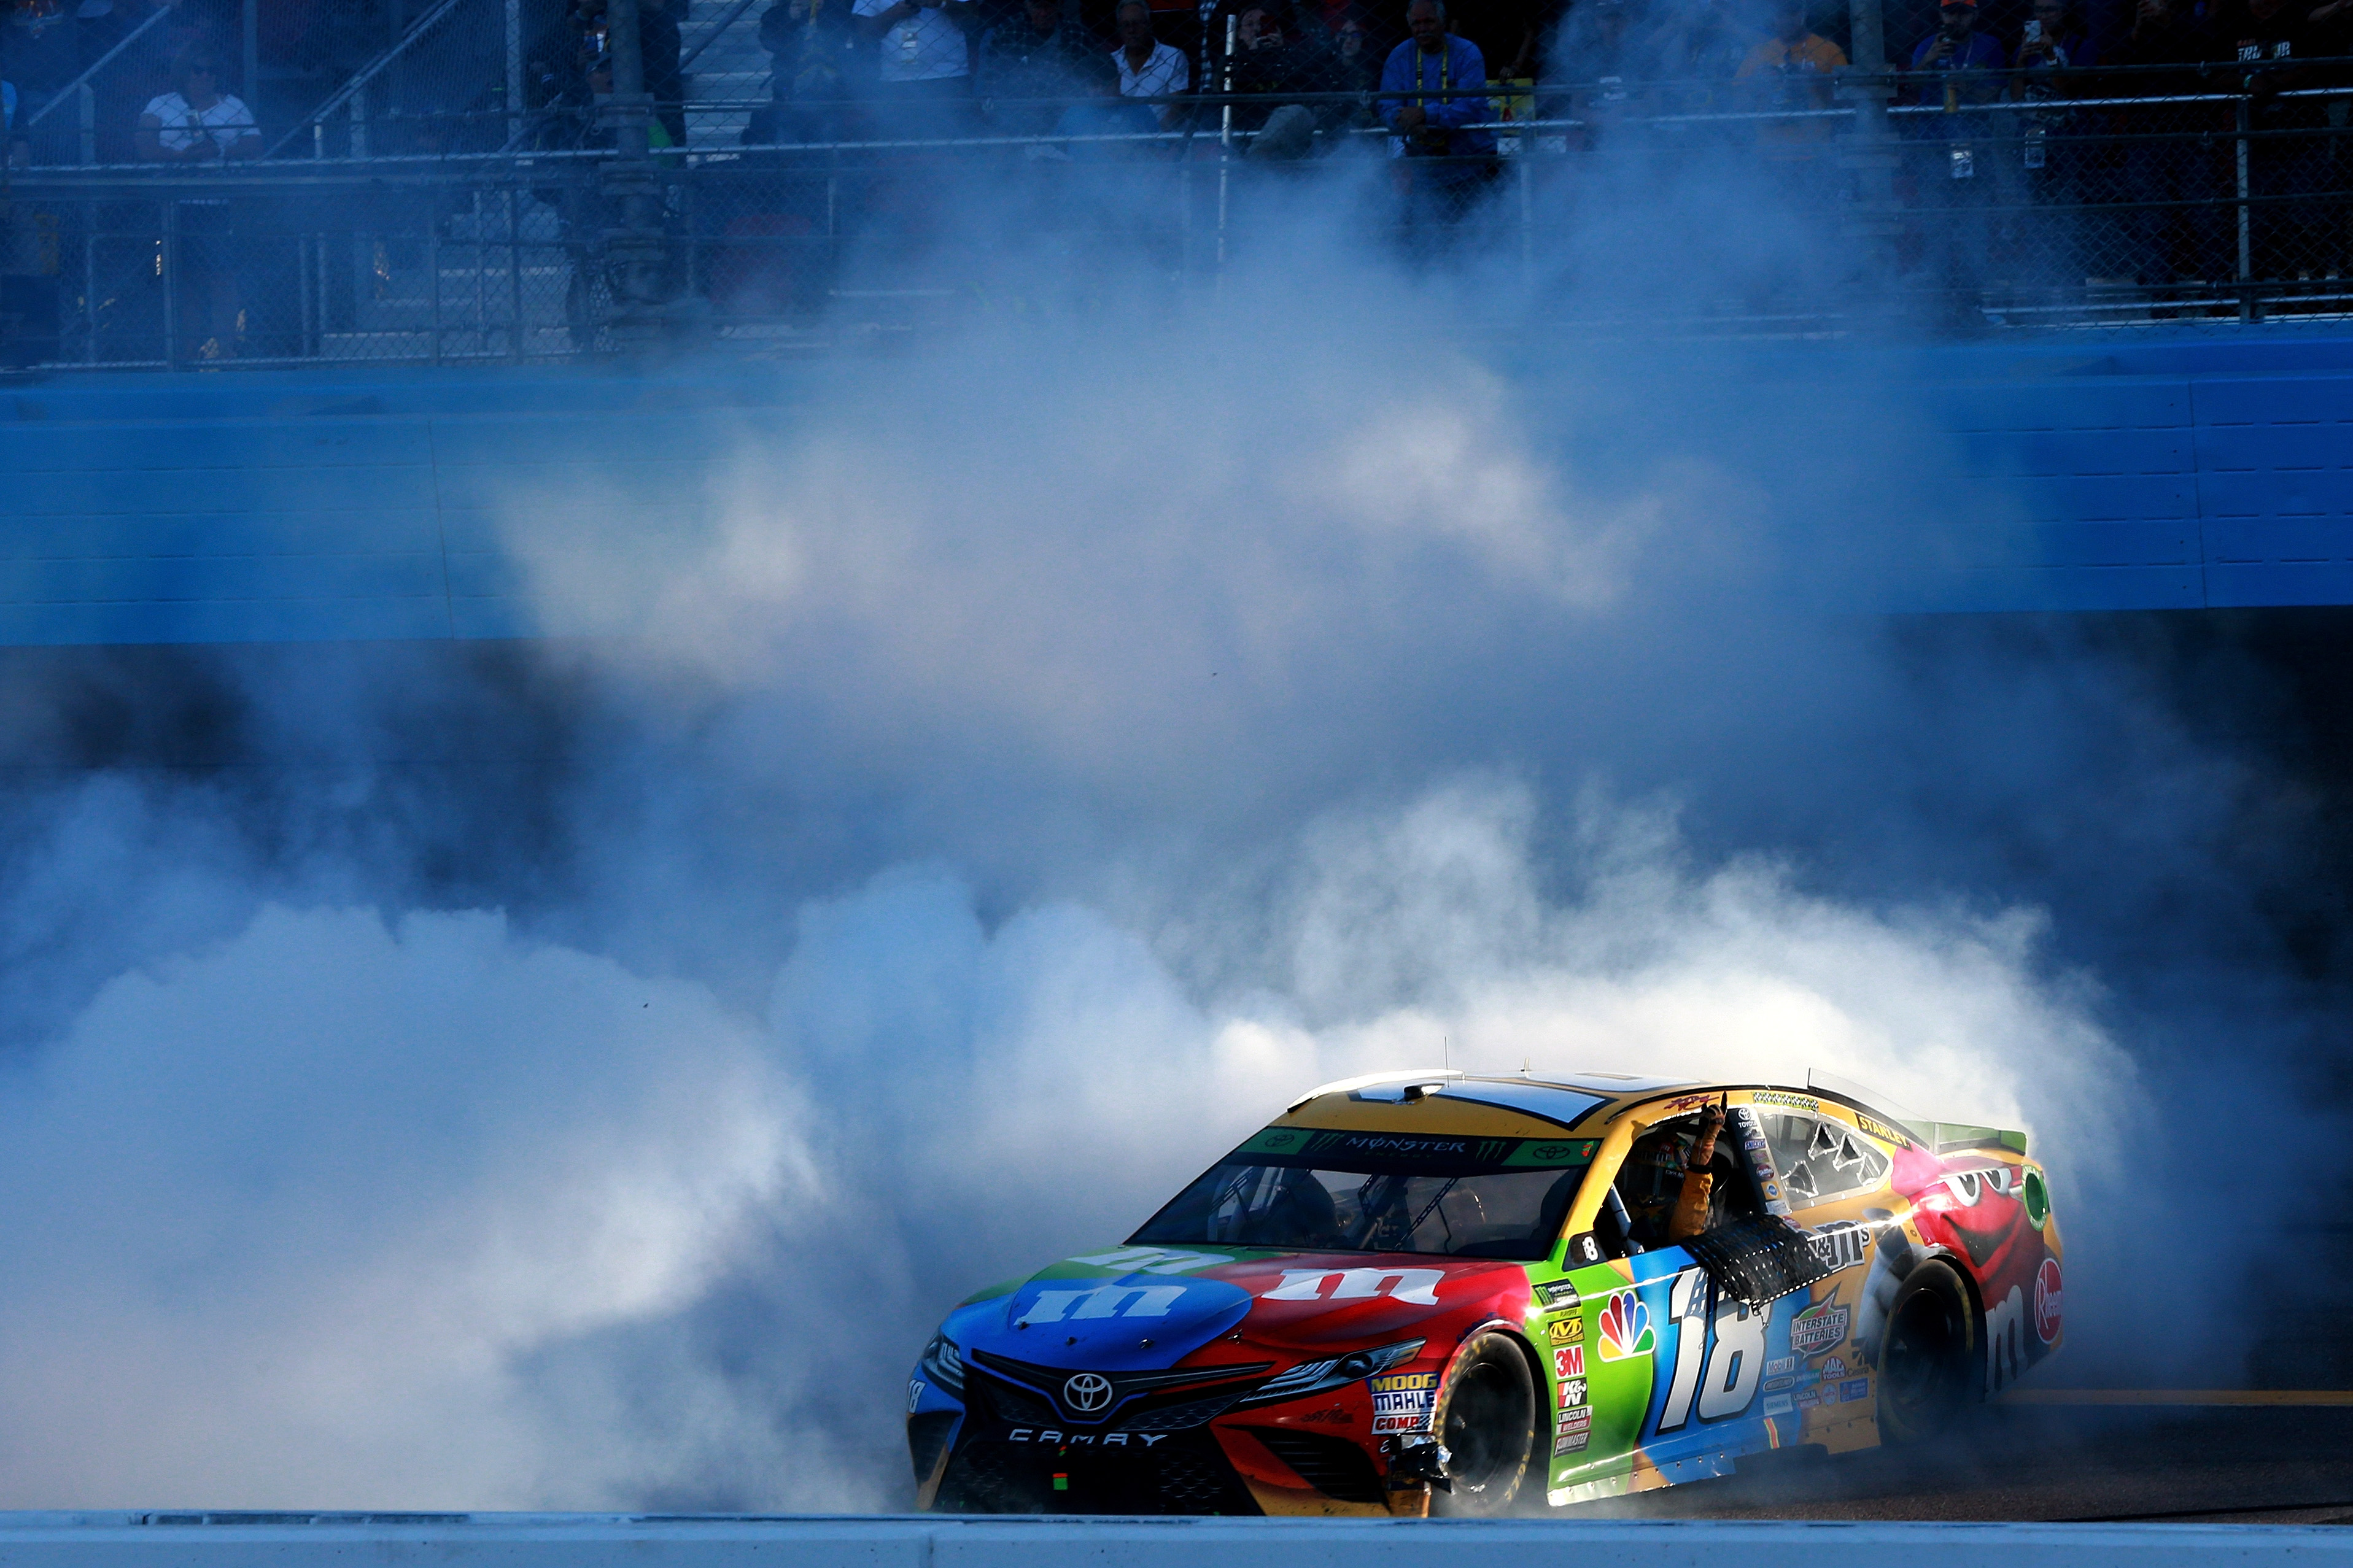 He smoked his way into the Championship 4.  Kyle Busch can win his second championship, but first with a full season of action.